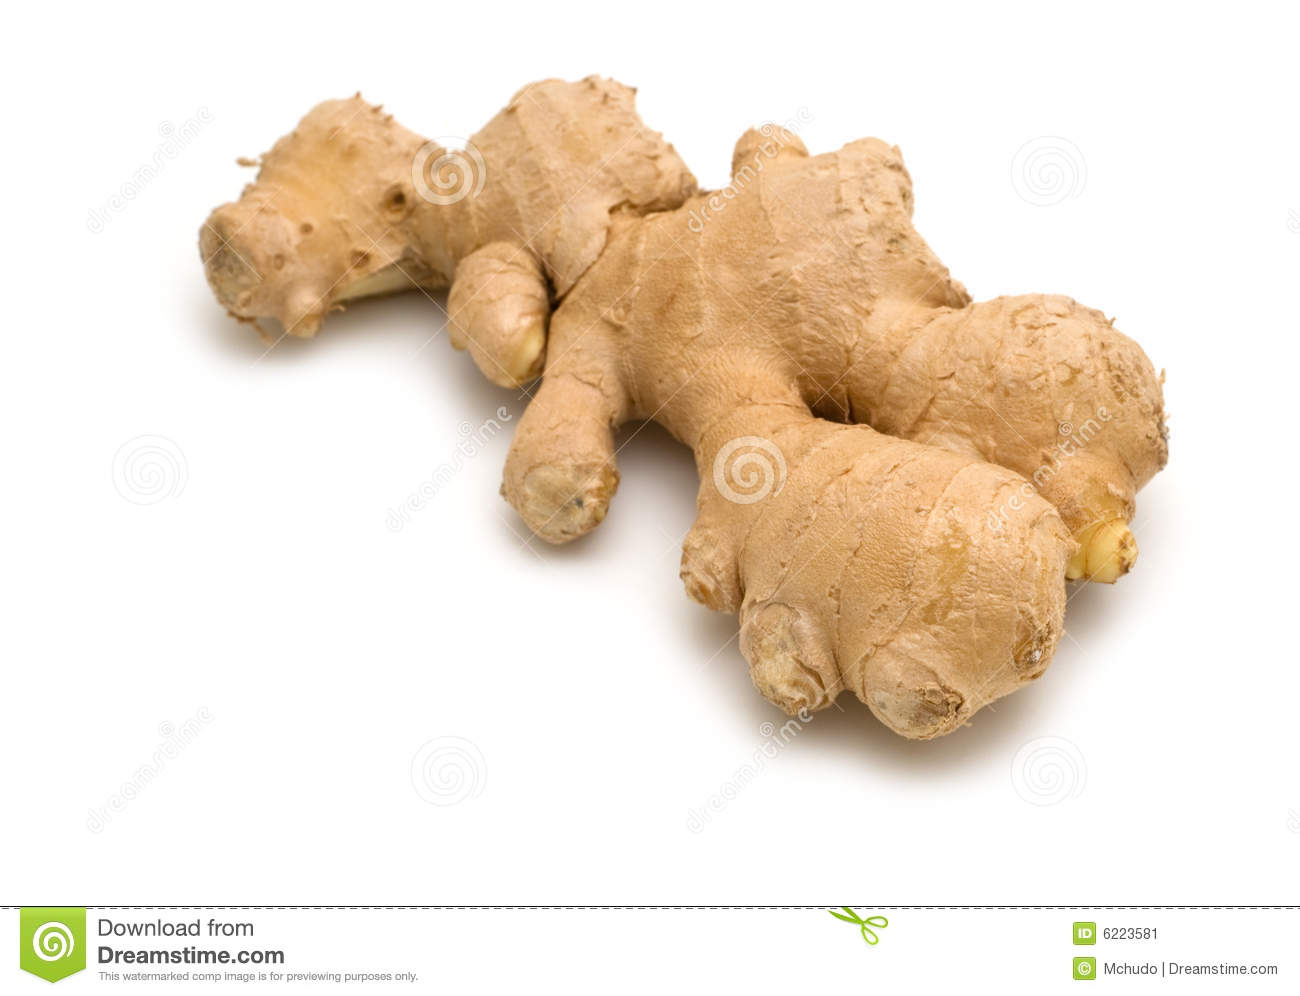 Ginger Root Stock Image   Image  6223581